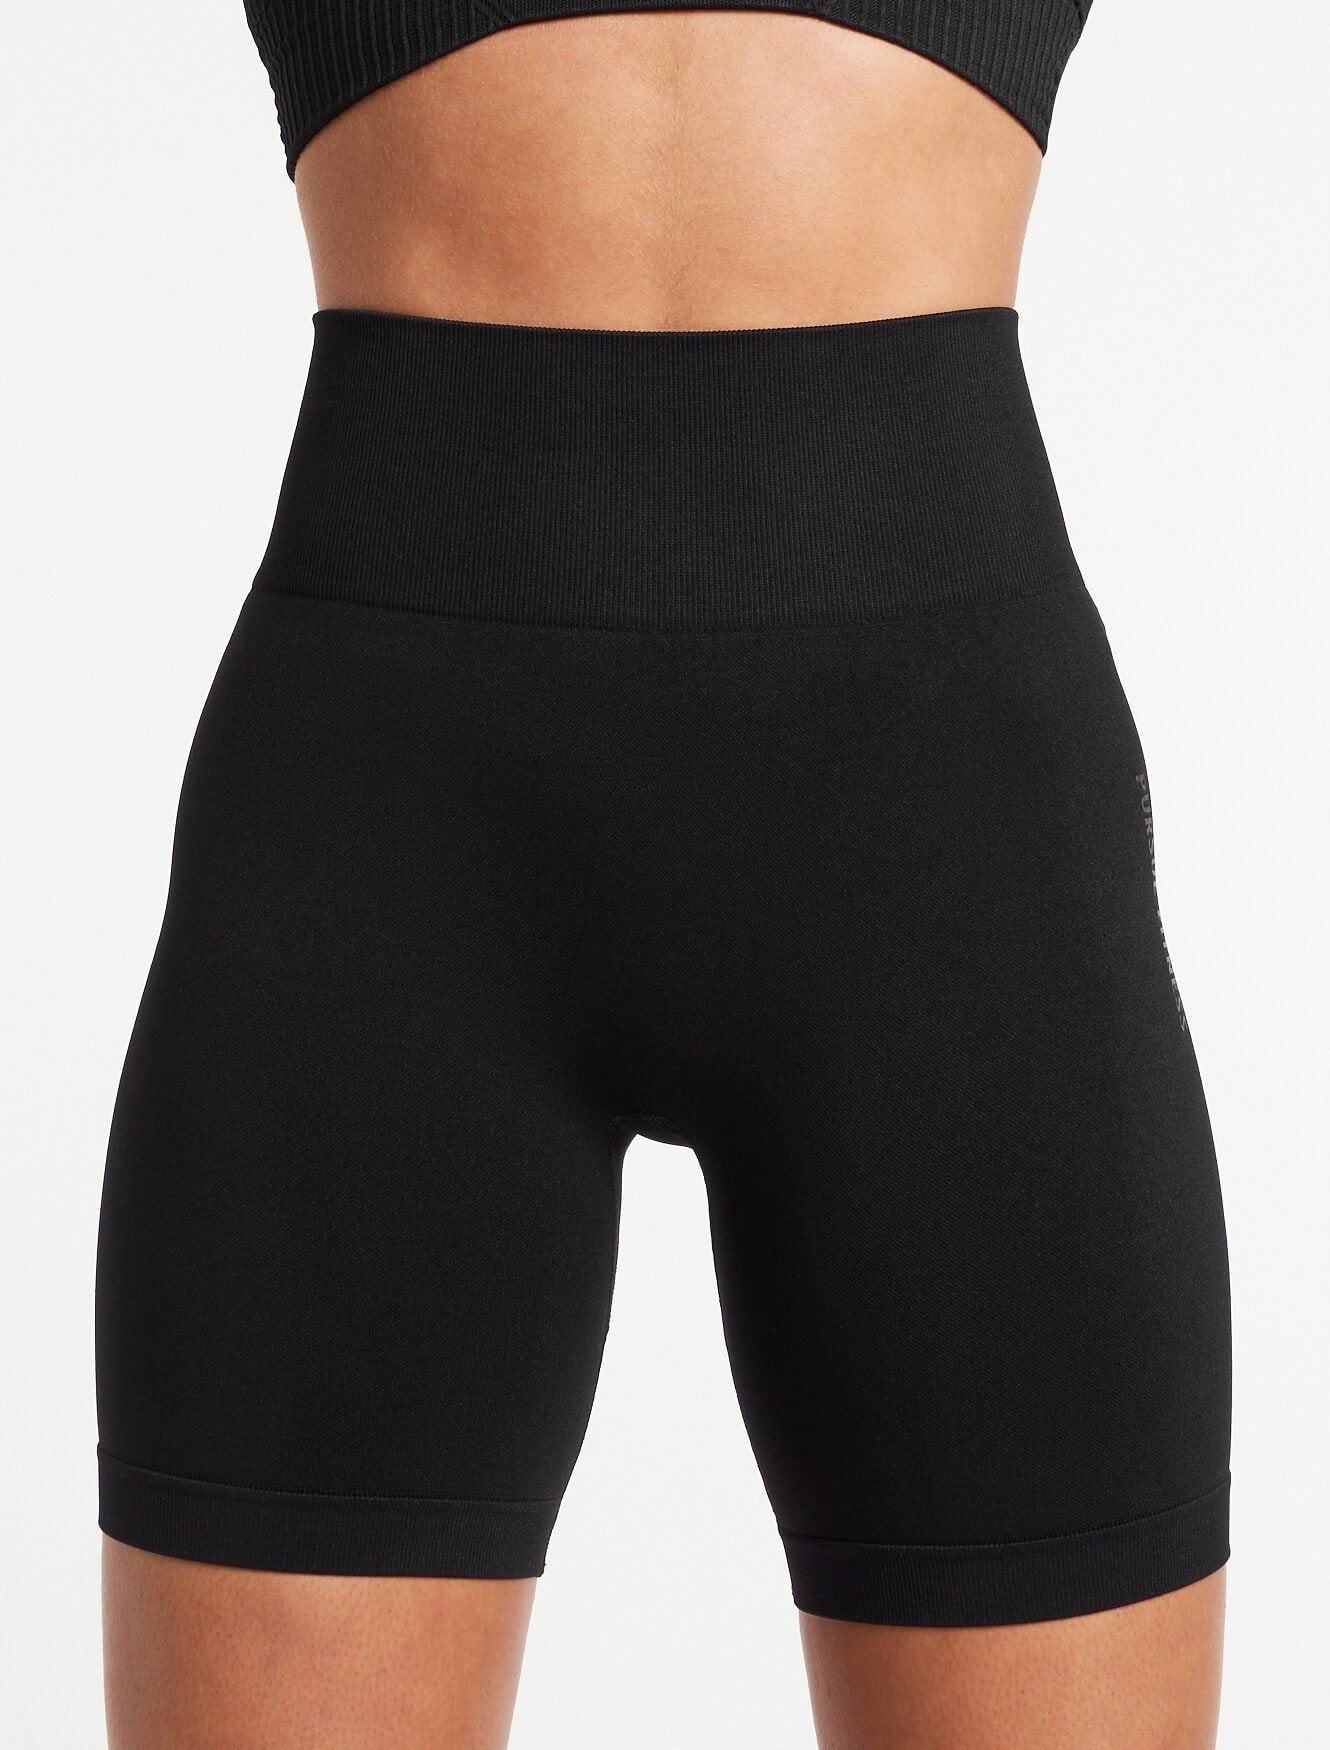 Afterglow Seamless Shorts / Blackout Pursue Fitness 7